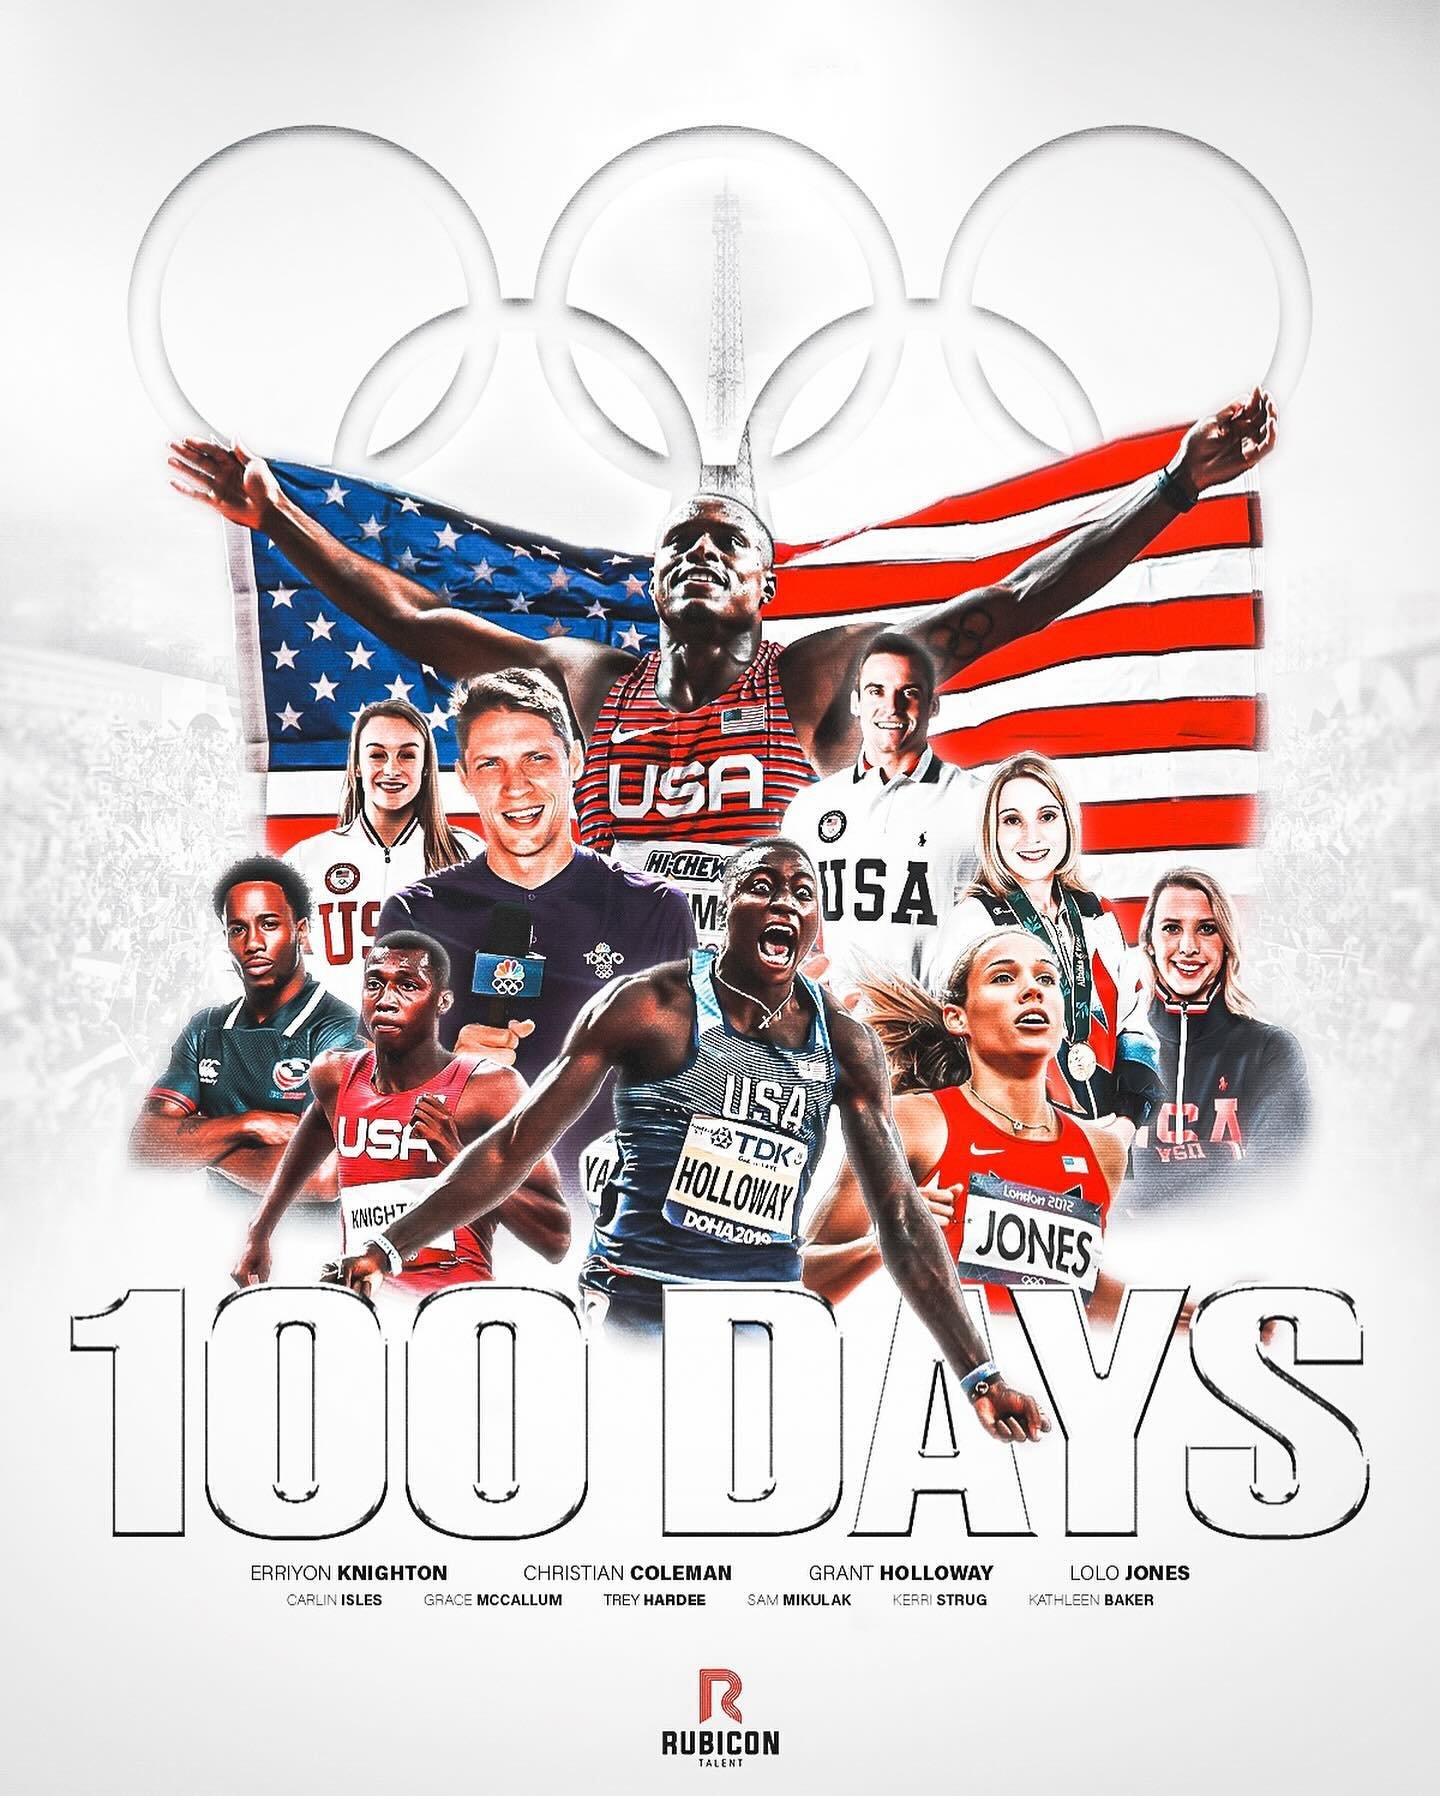 T-minus 100 days and counting🏅🇺🇸 

#Olympics #Paris2024